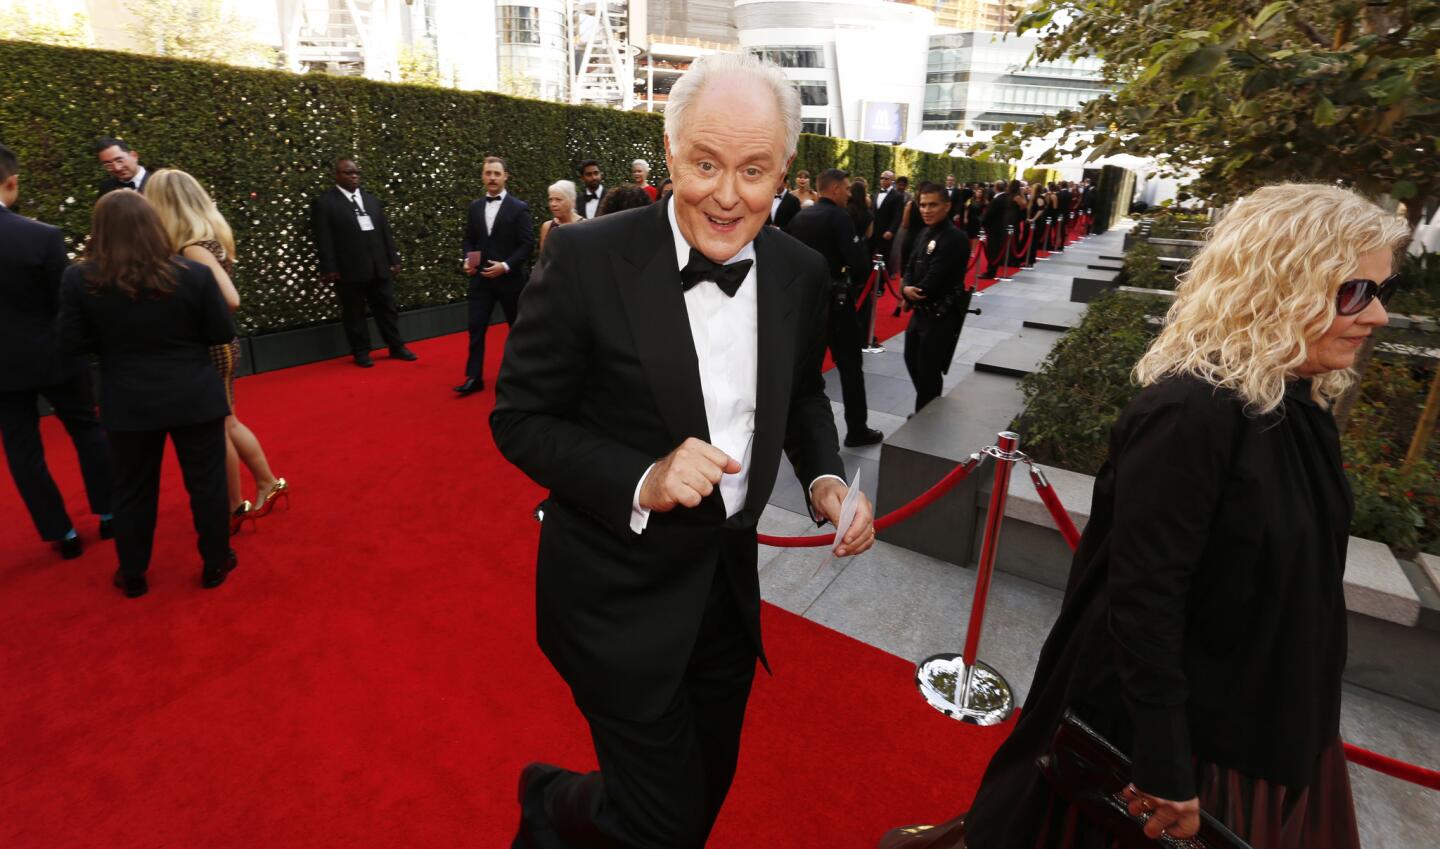 John Lithgow arriving at the 69th Emmy Awards at the Microsoft Theater in Los Angeles.